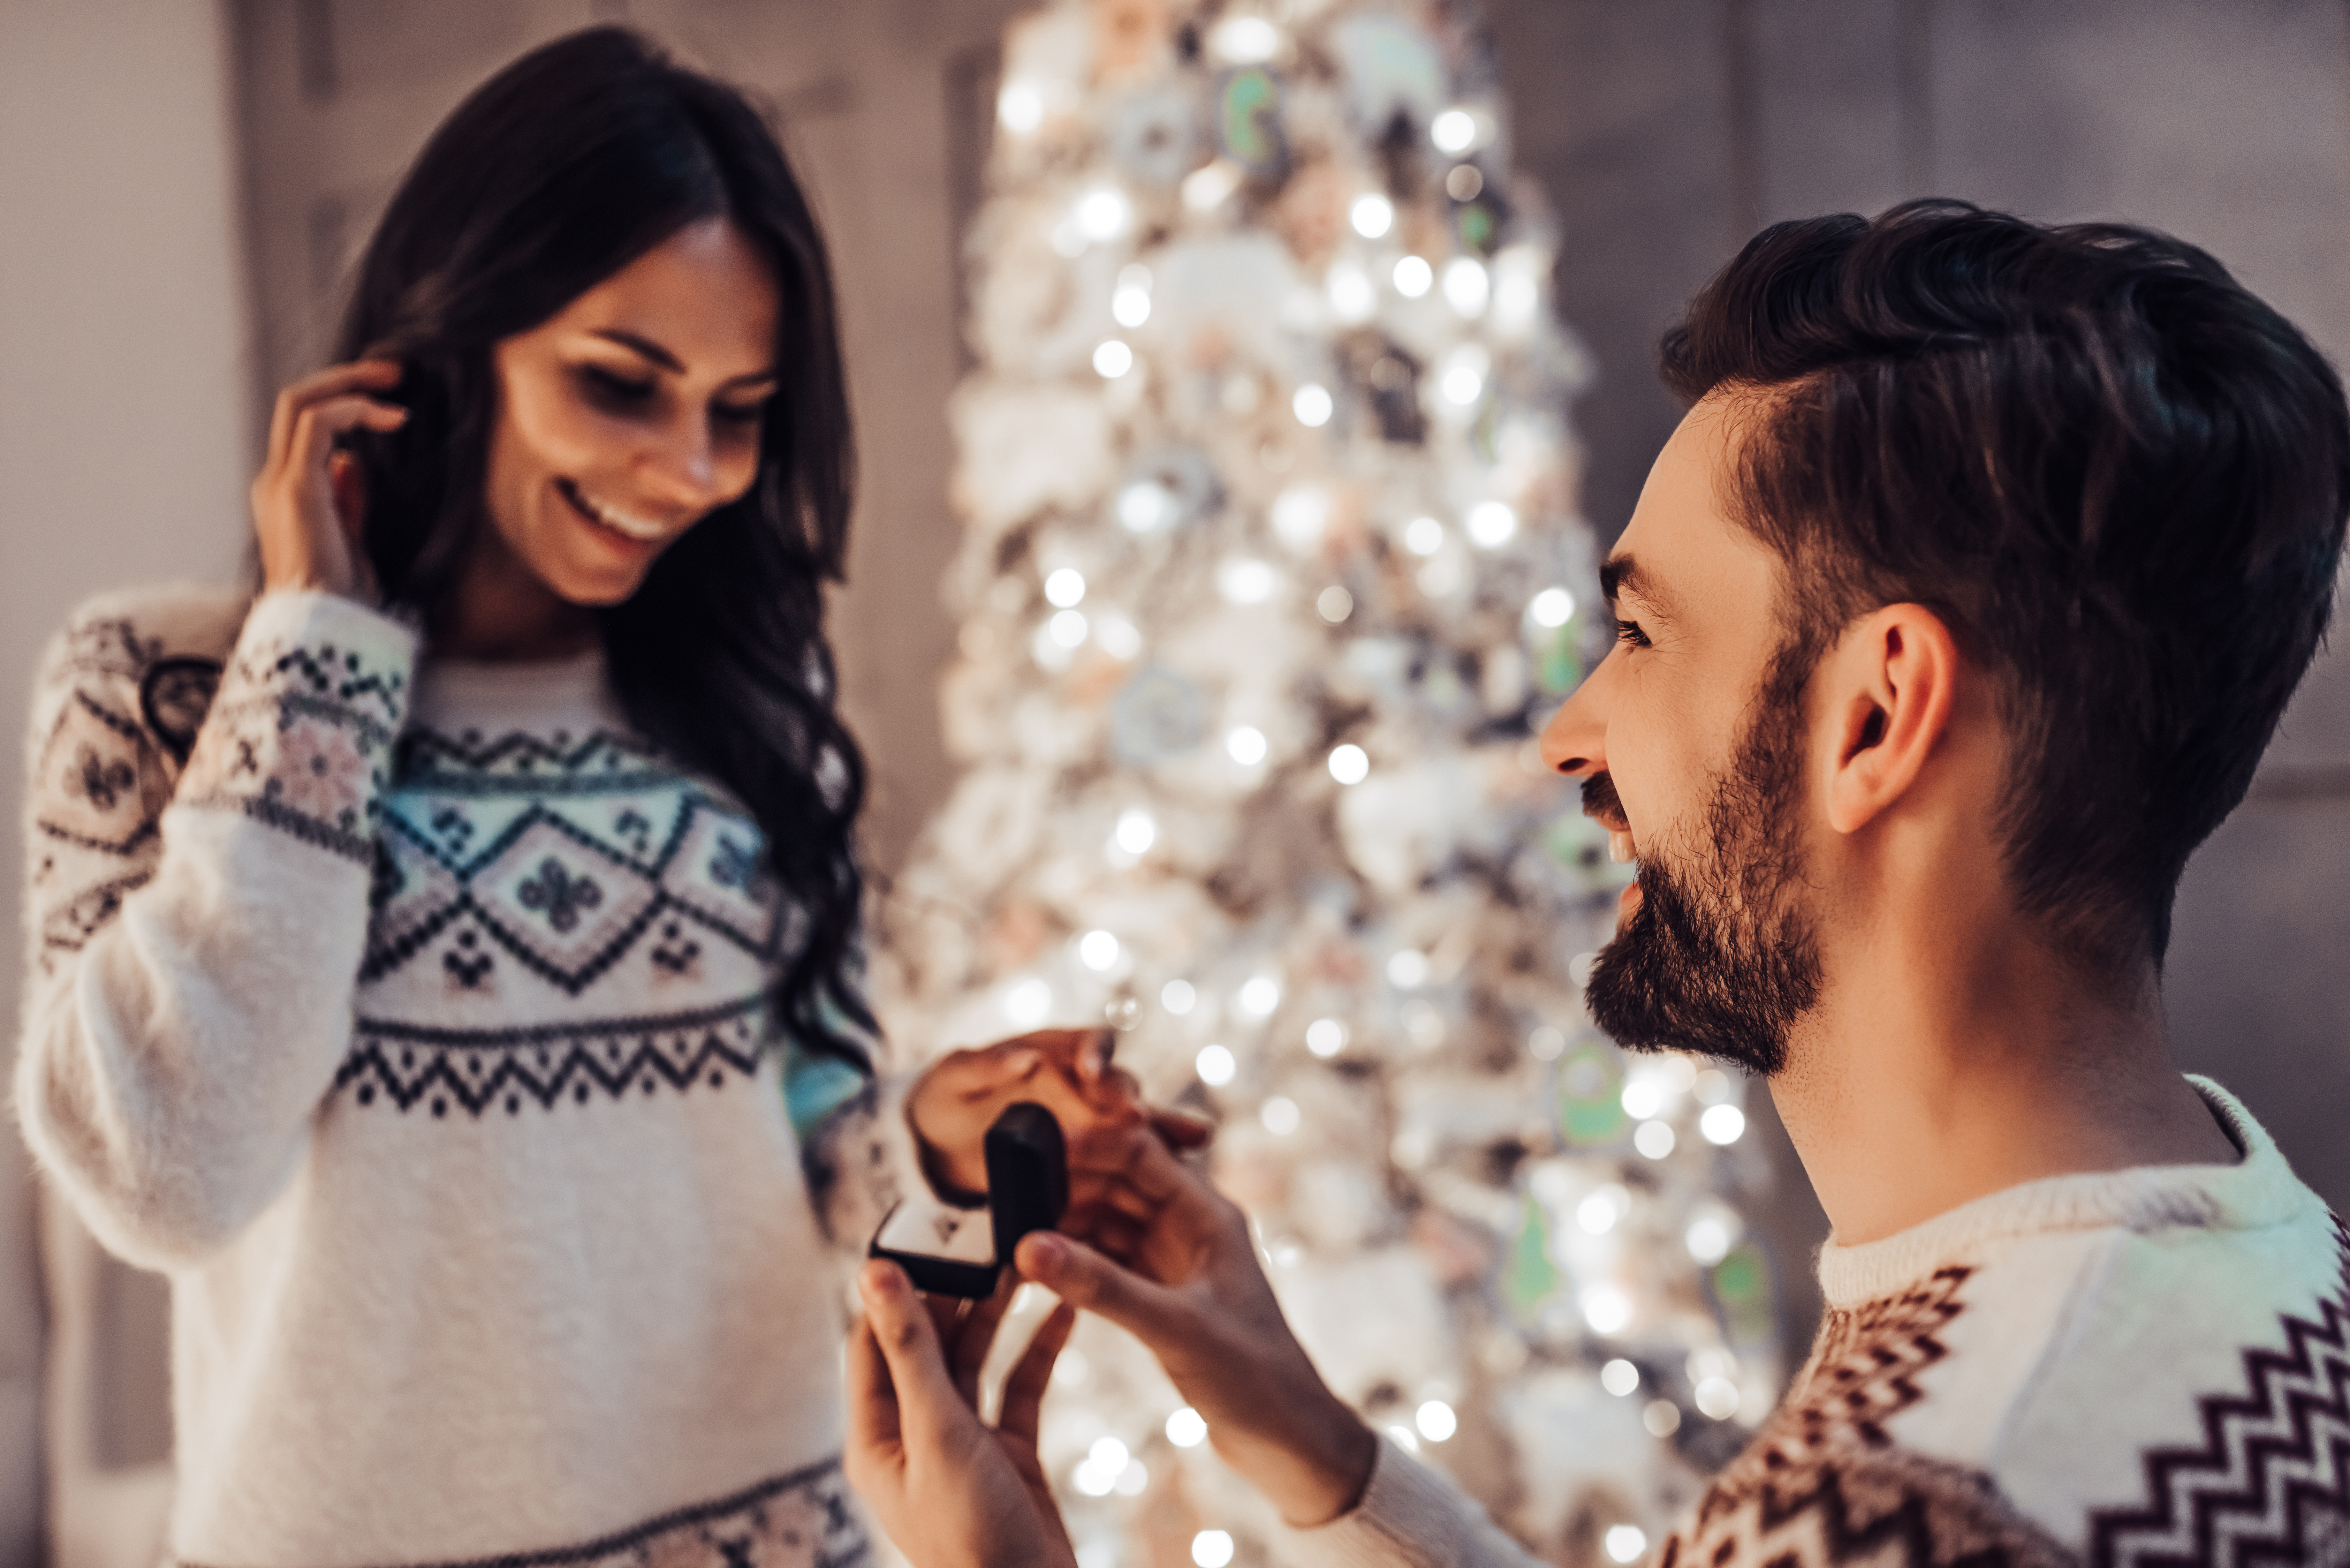 A man proposing to his girlfriend at Christmas | Source: Shutterstock